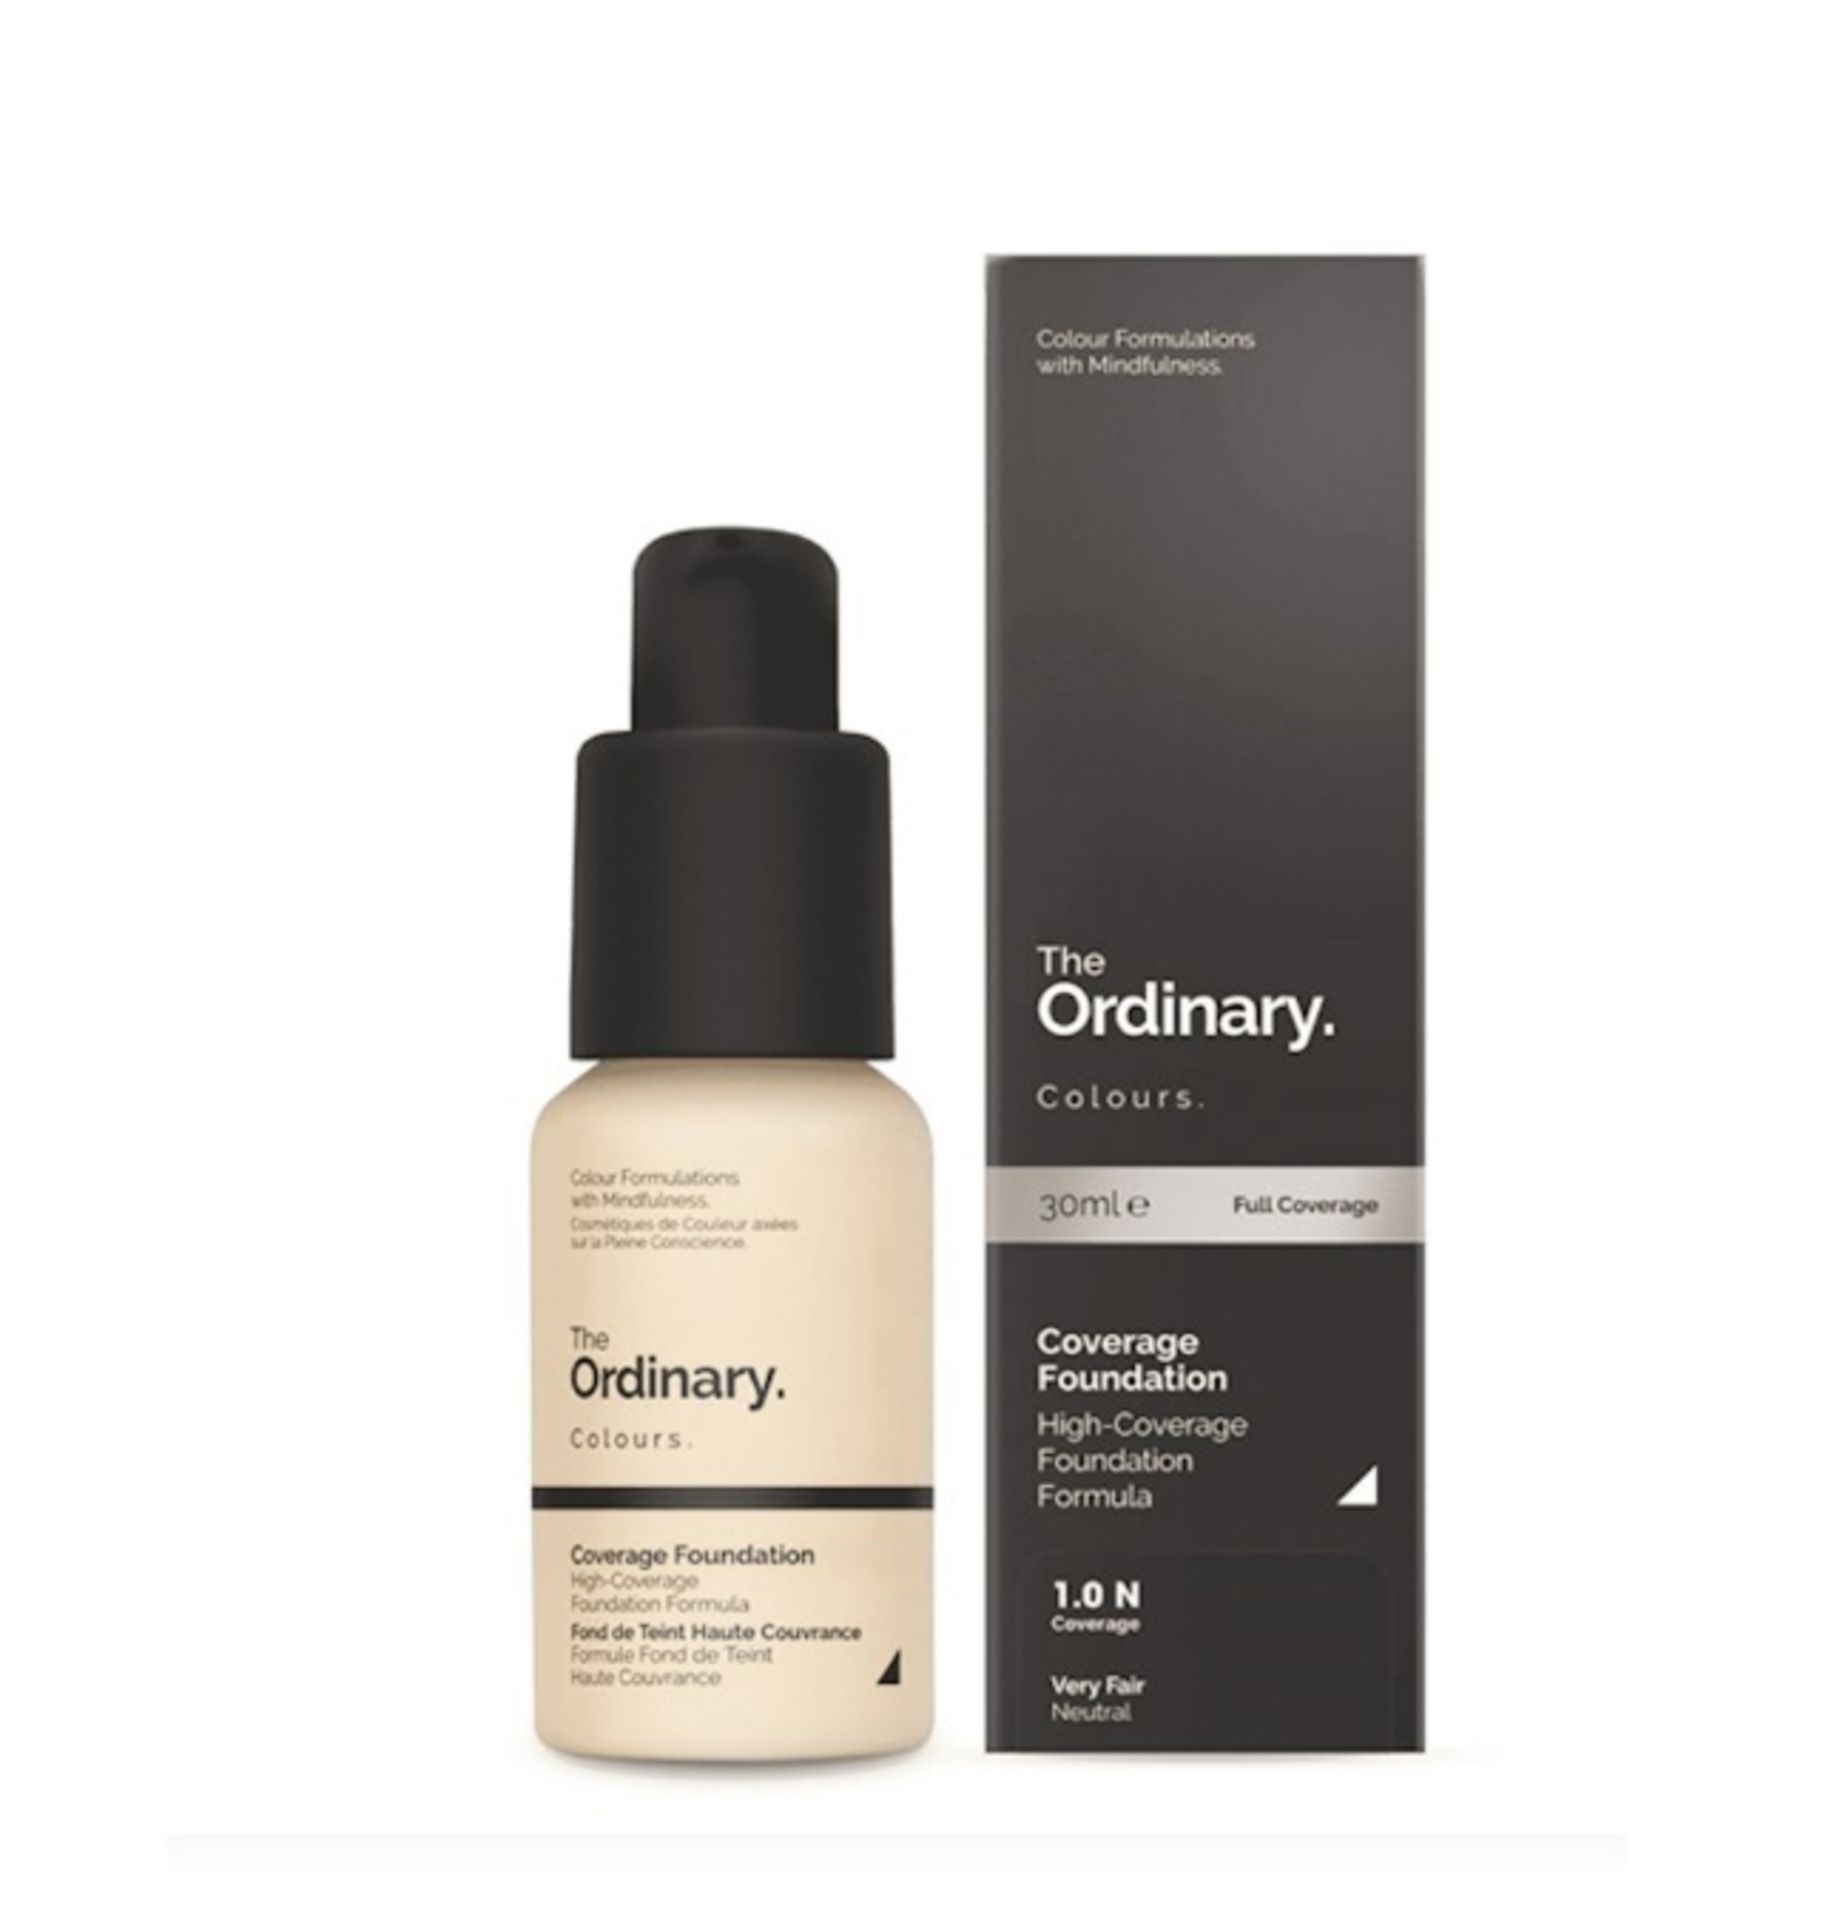 7 x The Ordinary Full Coverage Foundation 1.0N Very Fair Make Up Beauty